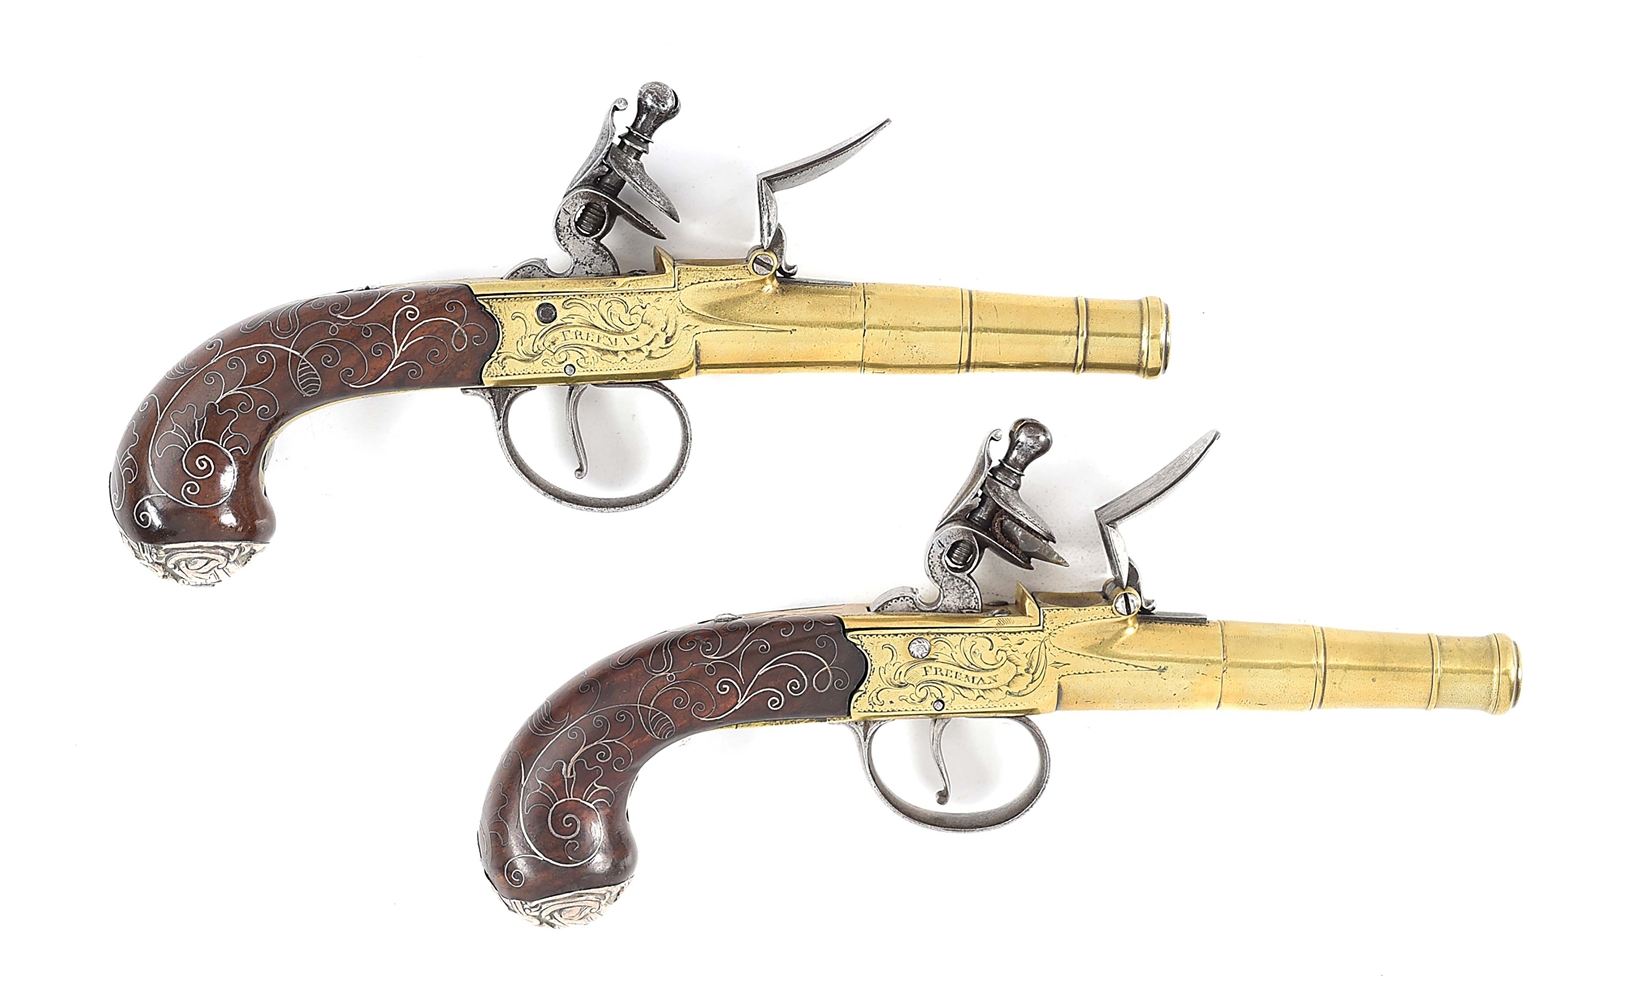 (A) PAIR OF ENGLISH FLINTLOCK POCKET PISTOLS BY FREEMAN WITH DISPLAY STAND.